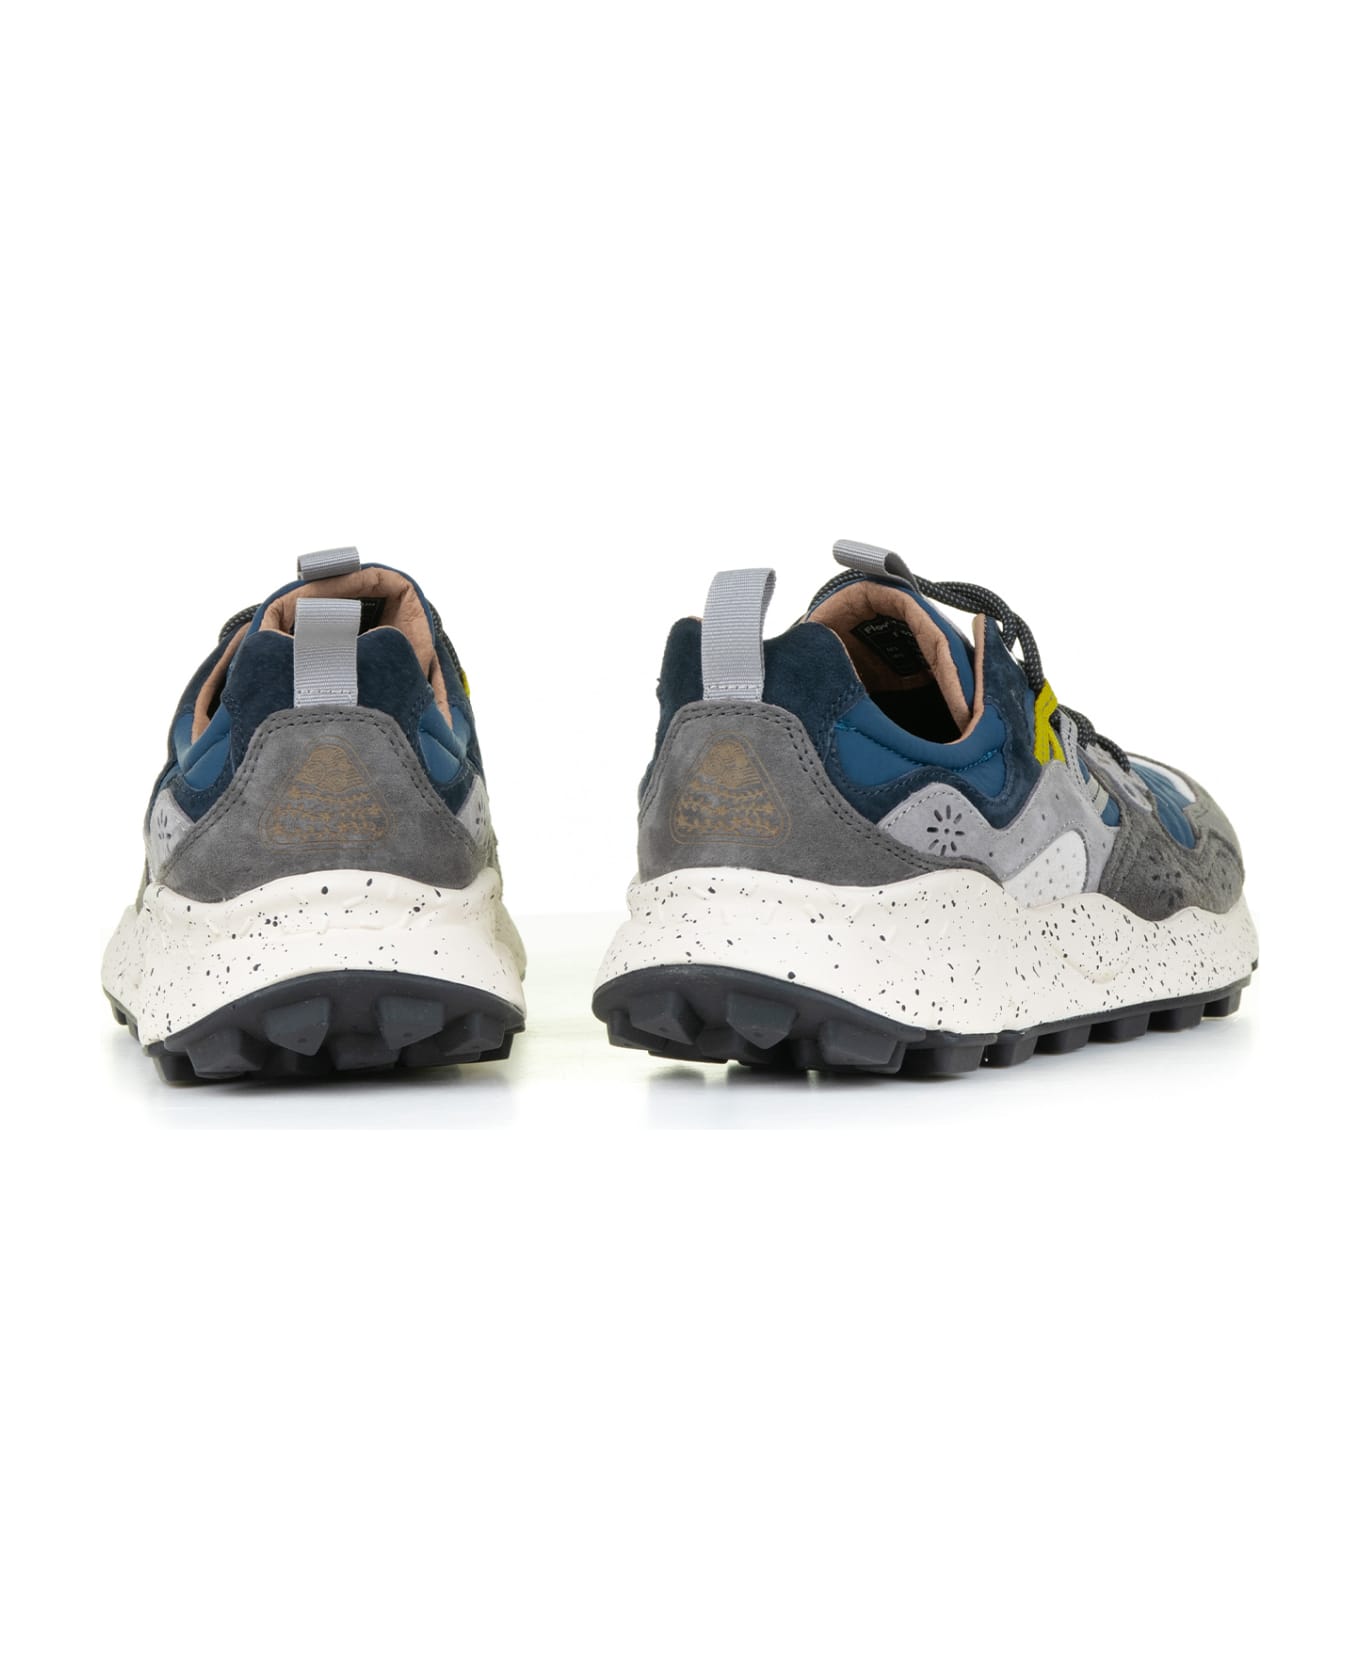 Flower Mountain Yamano Blue Sneakers In Suede And Nylon - GRAY NAVY